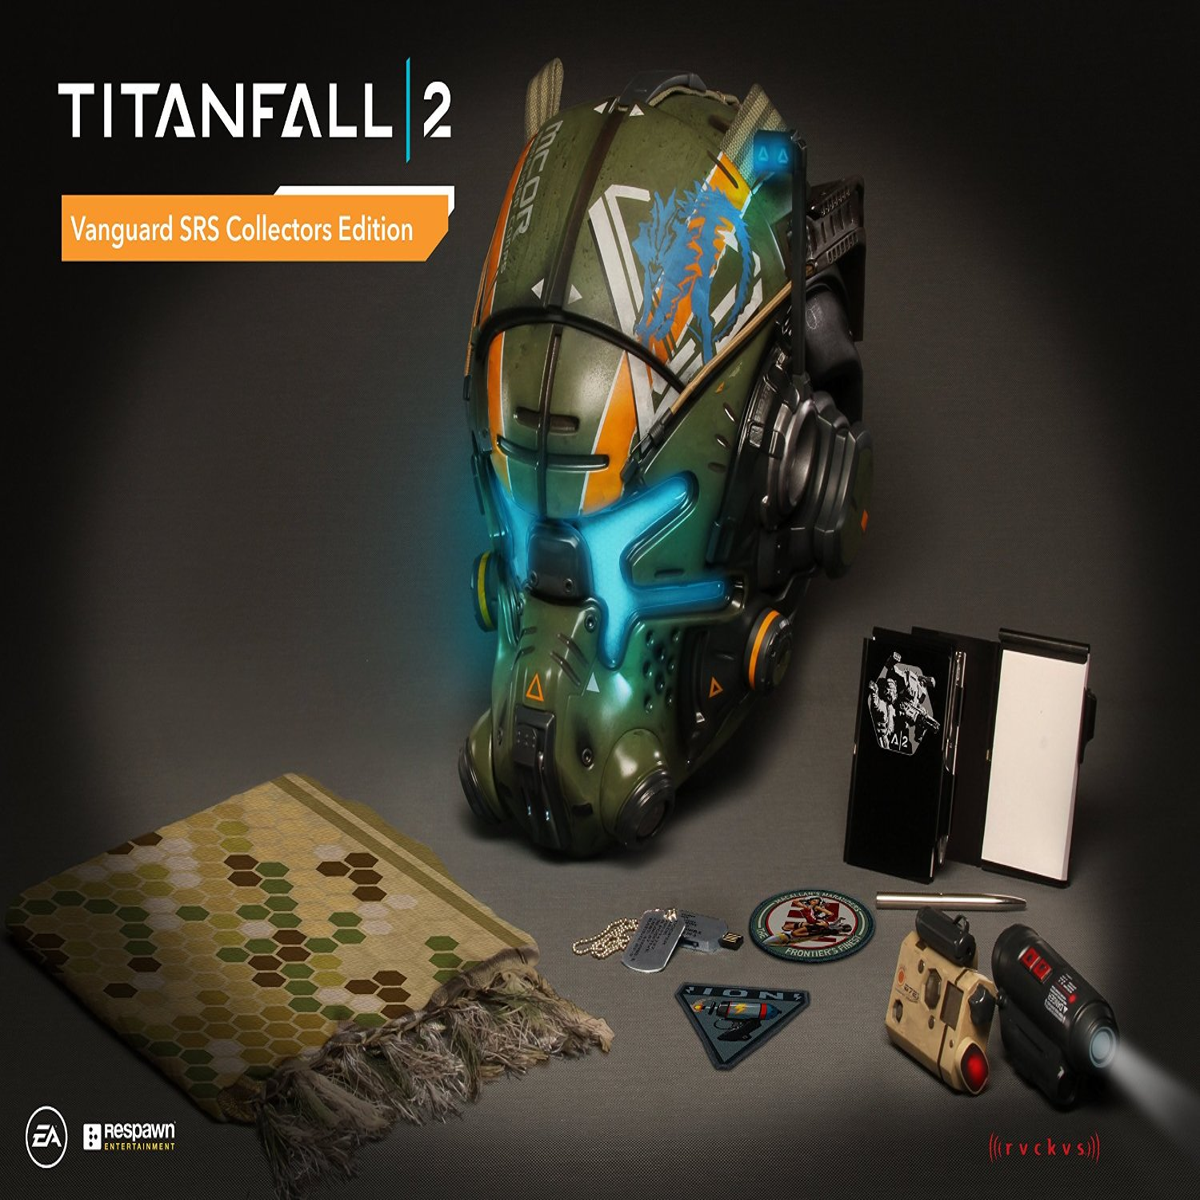 Titanfall 2 - How To Use Batteries in Your Titan